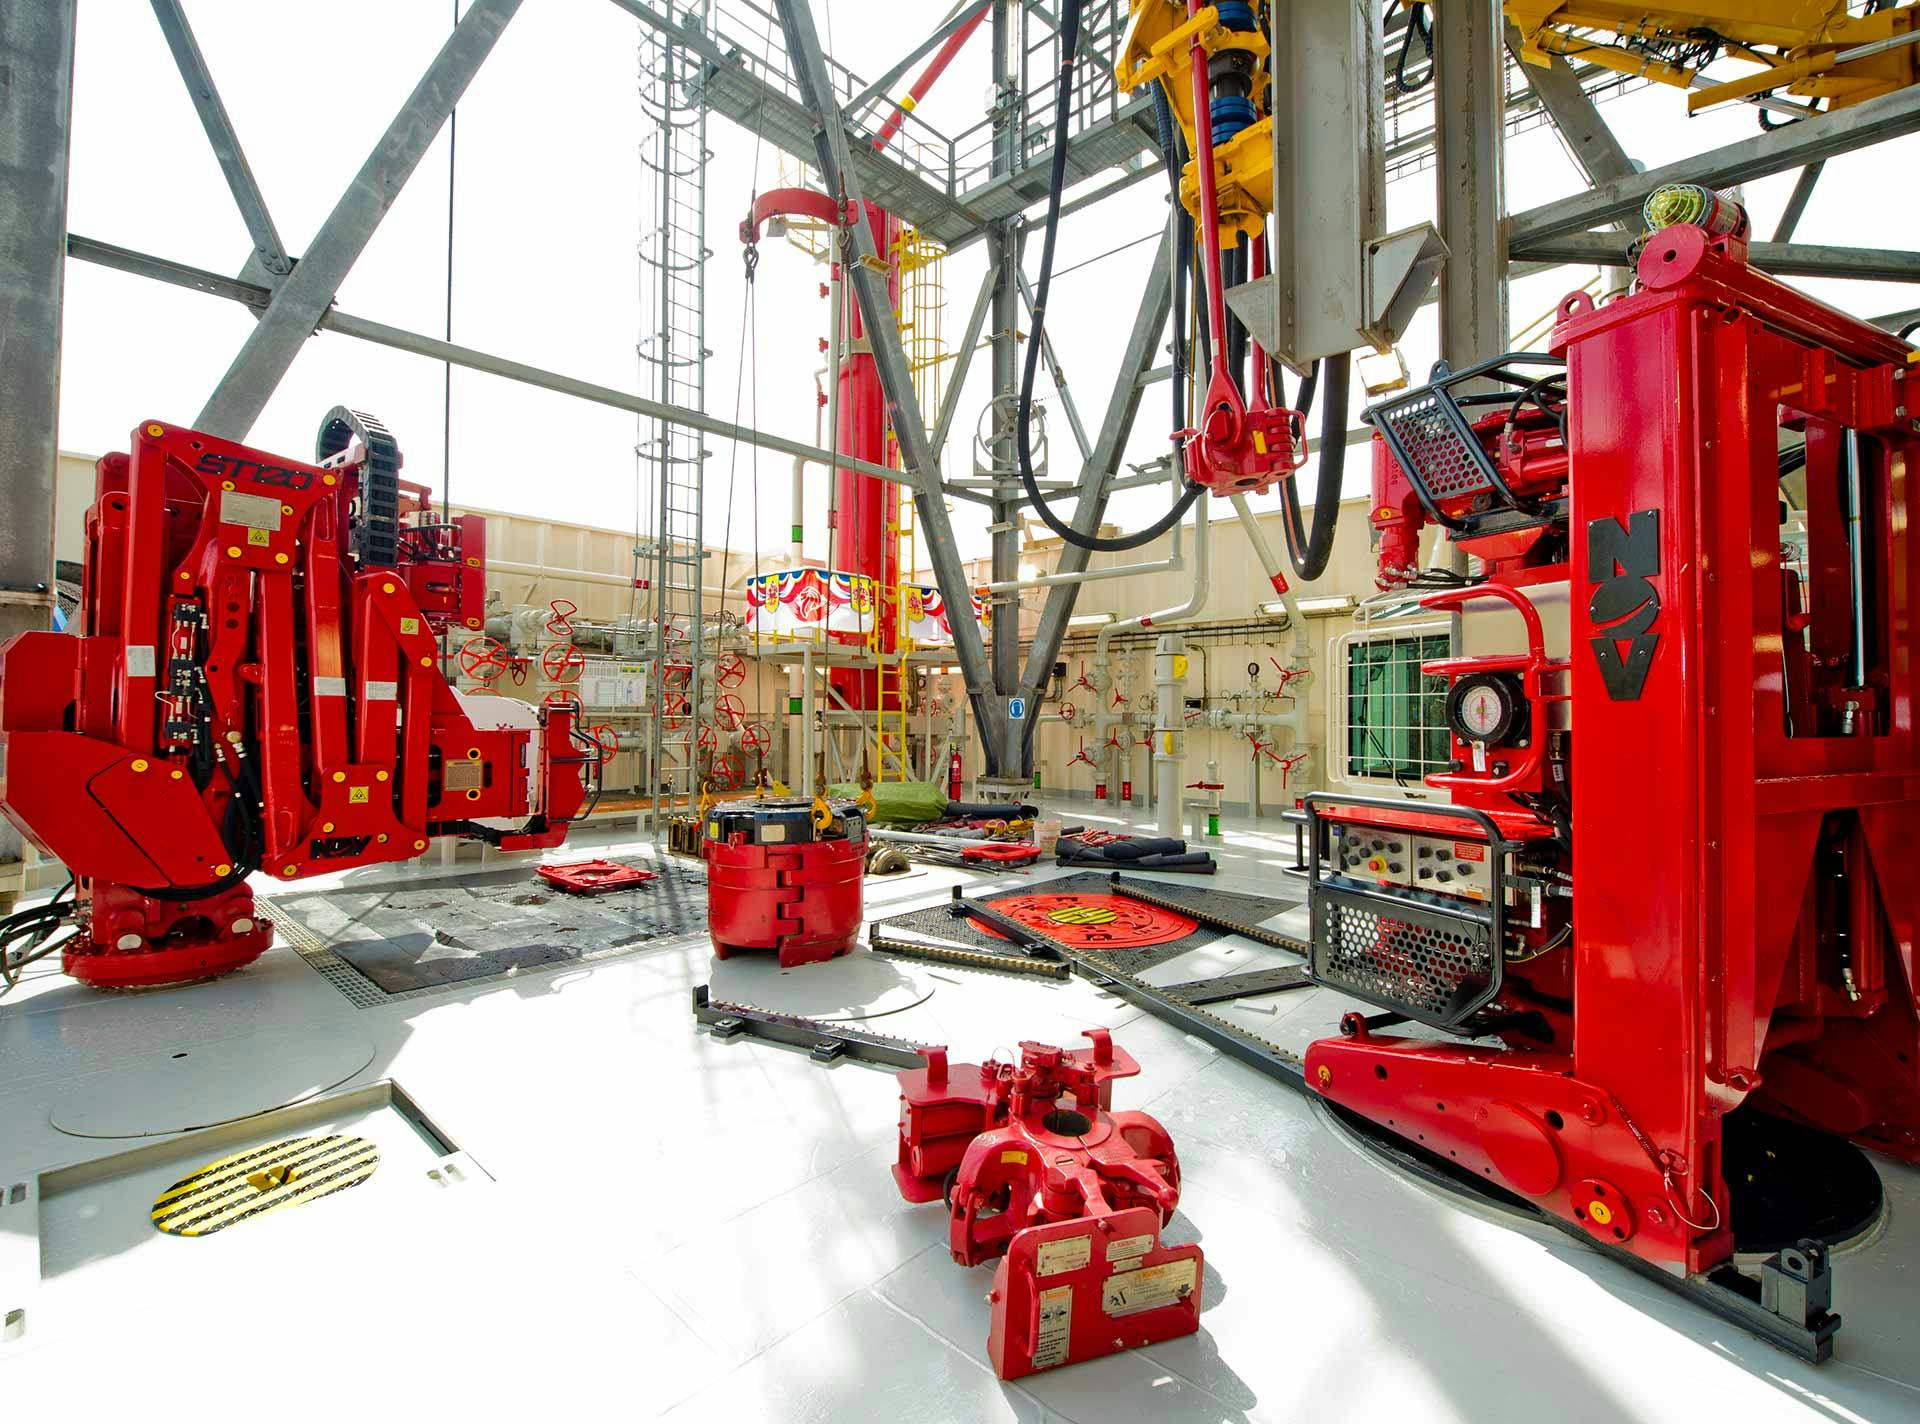 This rig has both an AR track-mounted Iron Roughneck and pedestal-mounted ST-120 Iron Roughneck installed on the Primus Jackup Rig. 